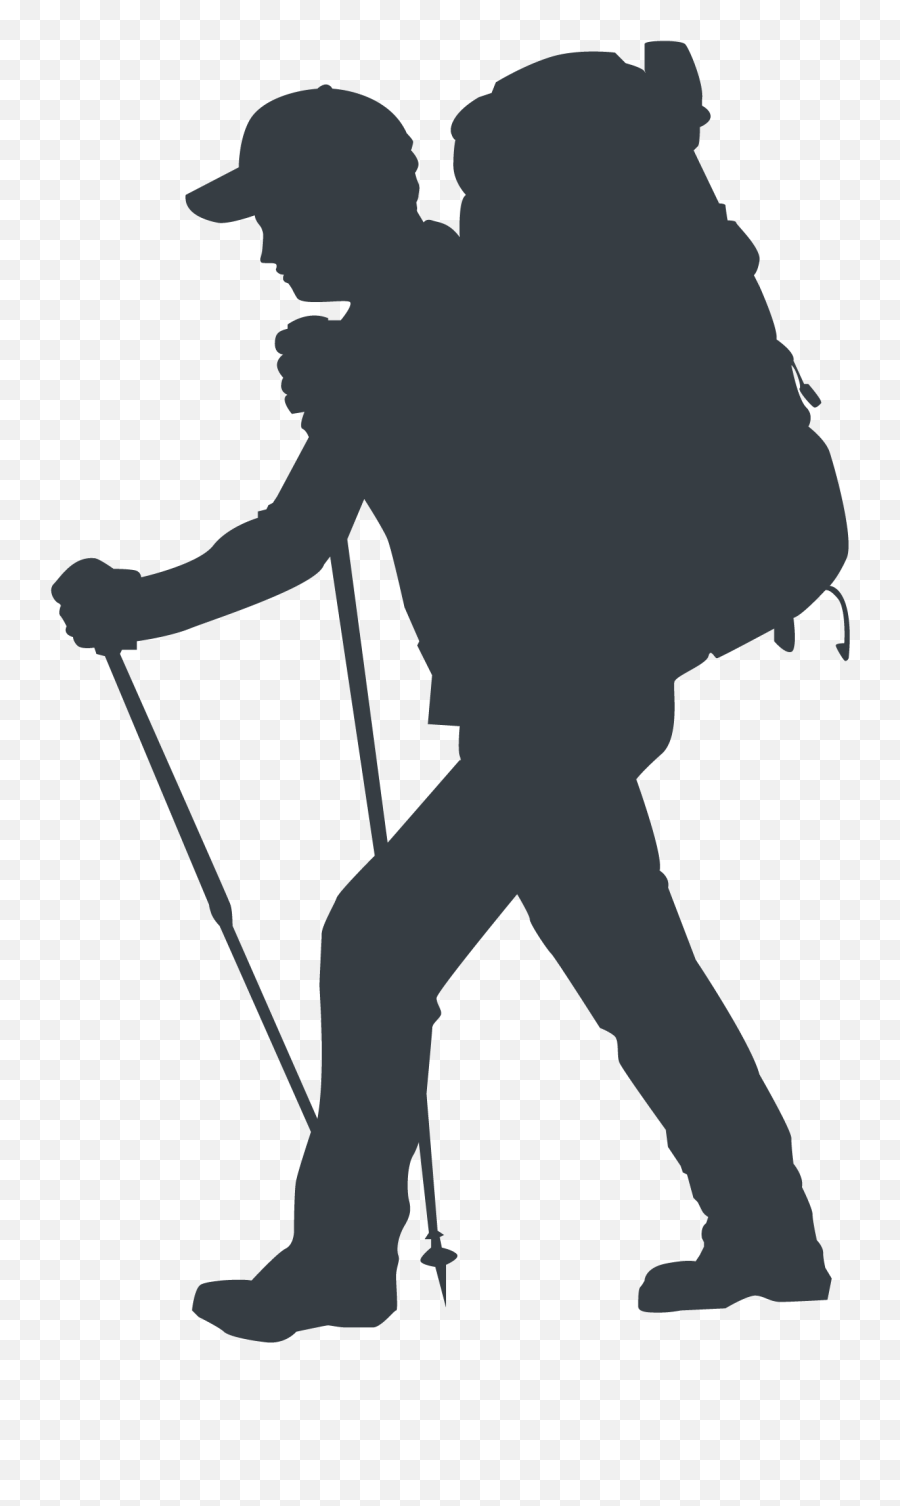 Hiking - Active U0026 Safe Hiking People Png Silhouette,Walking Silhouette Png